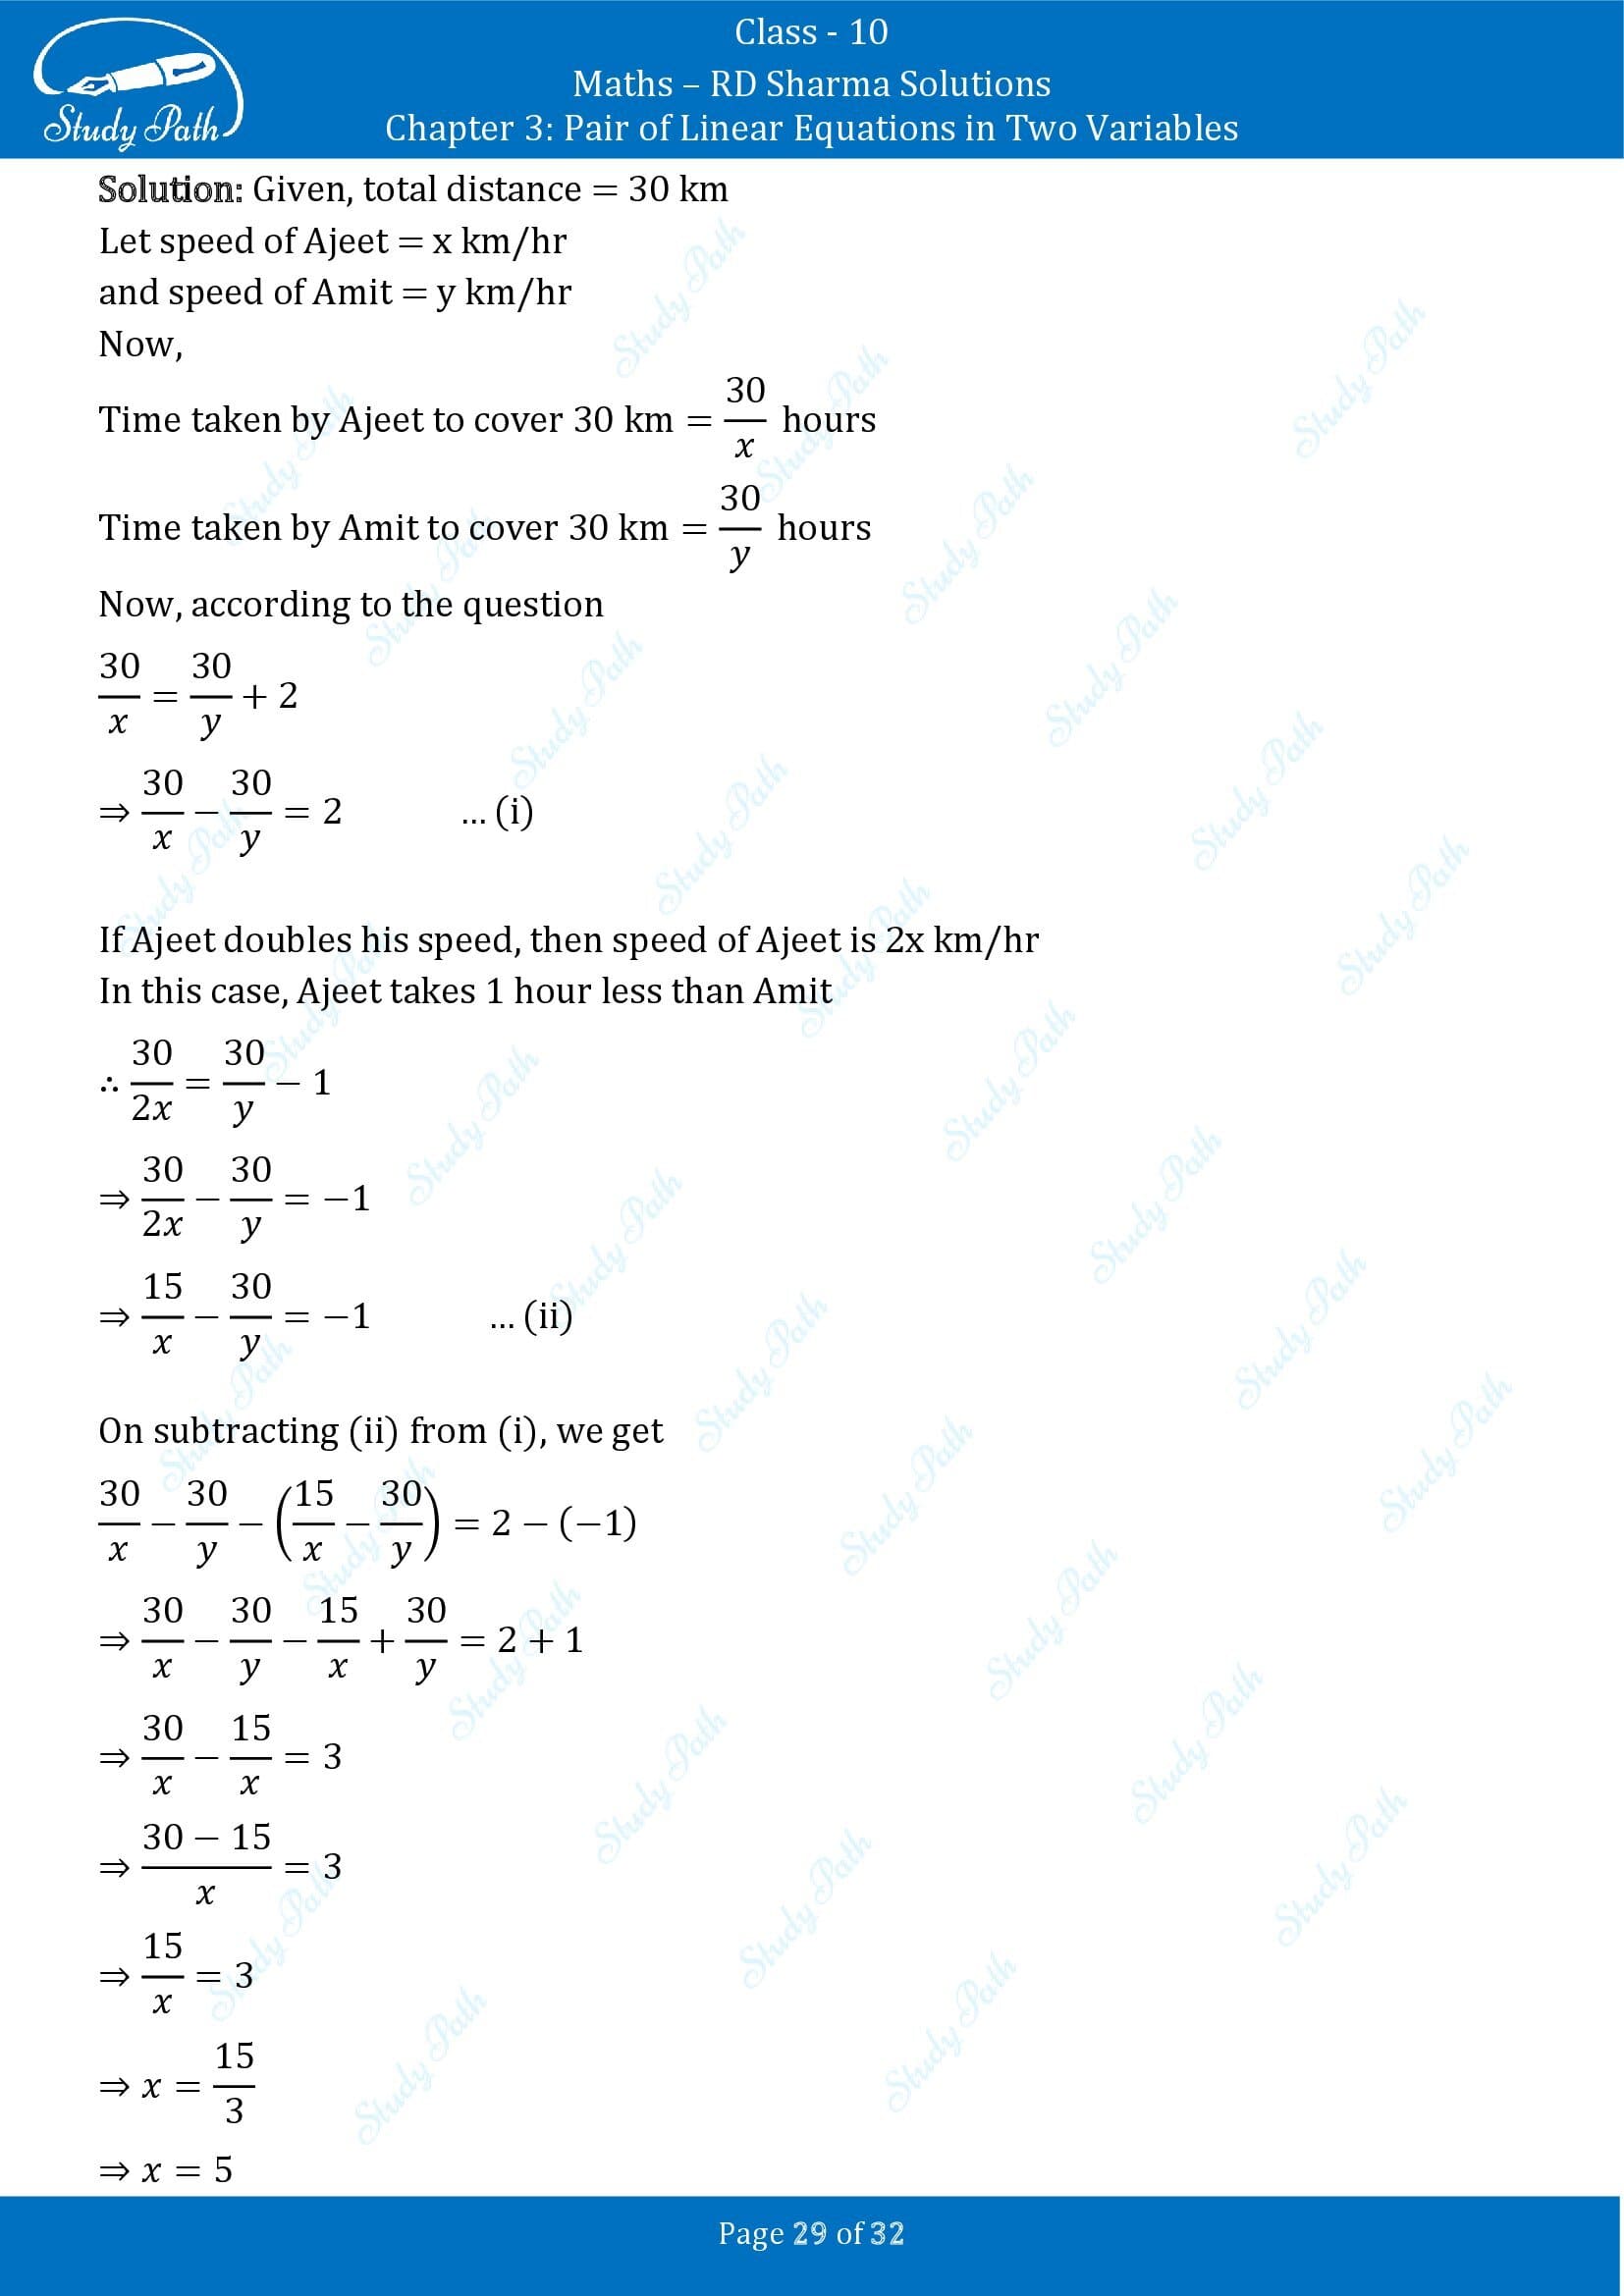 RD Sharma Solutions Class 10 Chapter 3 Pair of Linear Equations in Two Variables Exercise 3.10 00029